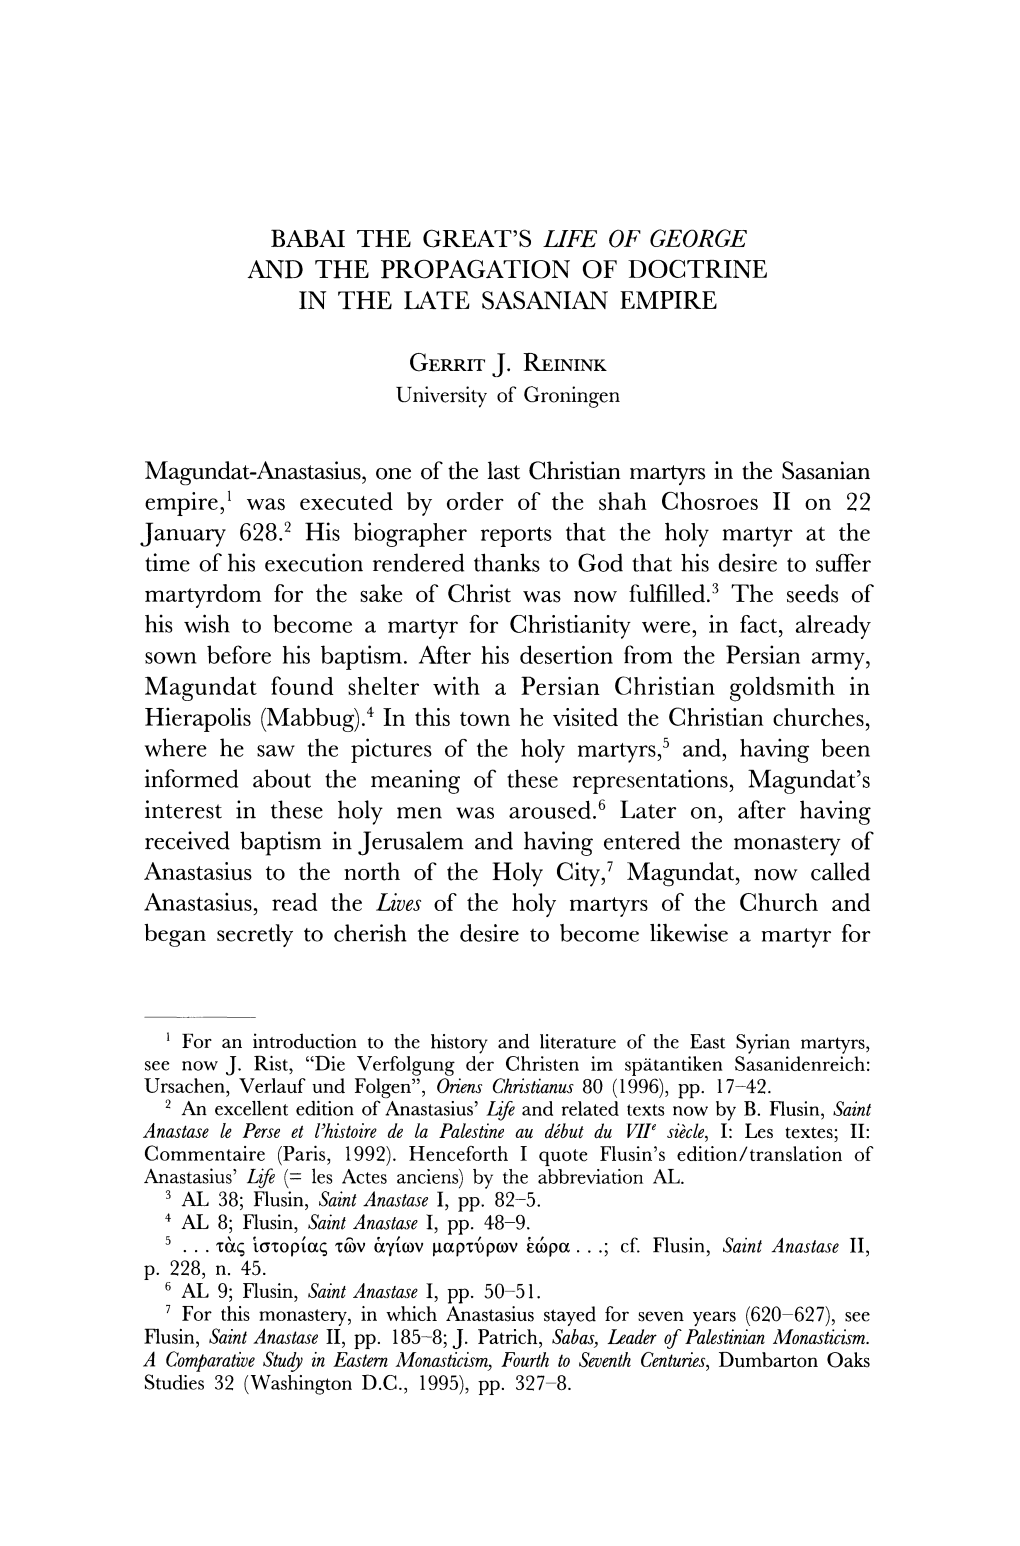 BABAI the GREAT's Life of GEORGE and the PROPAGATION of DOCTRINE in the LATE SASANIAN EMPIRE